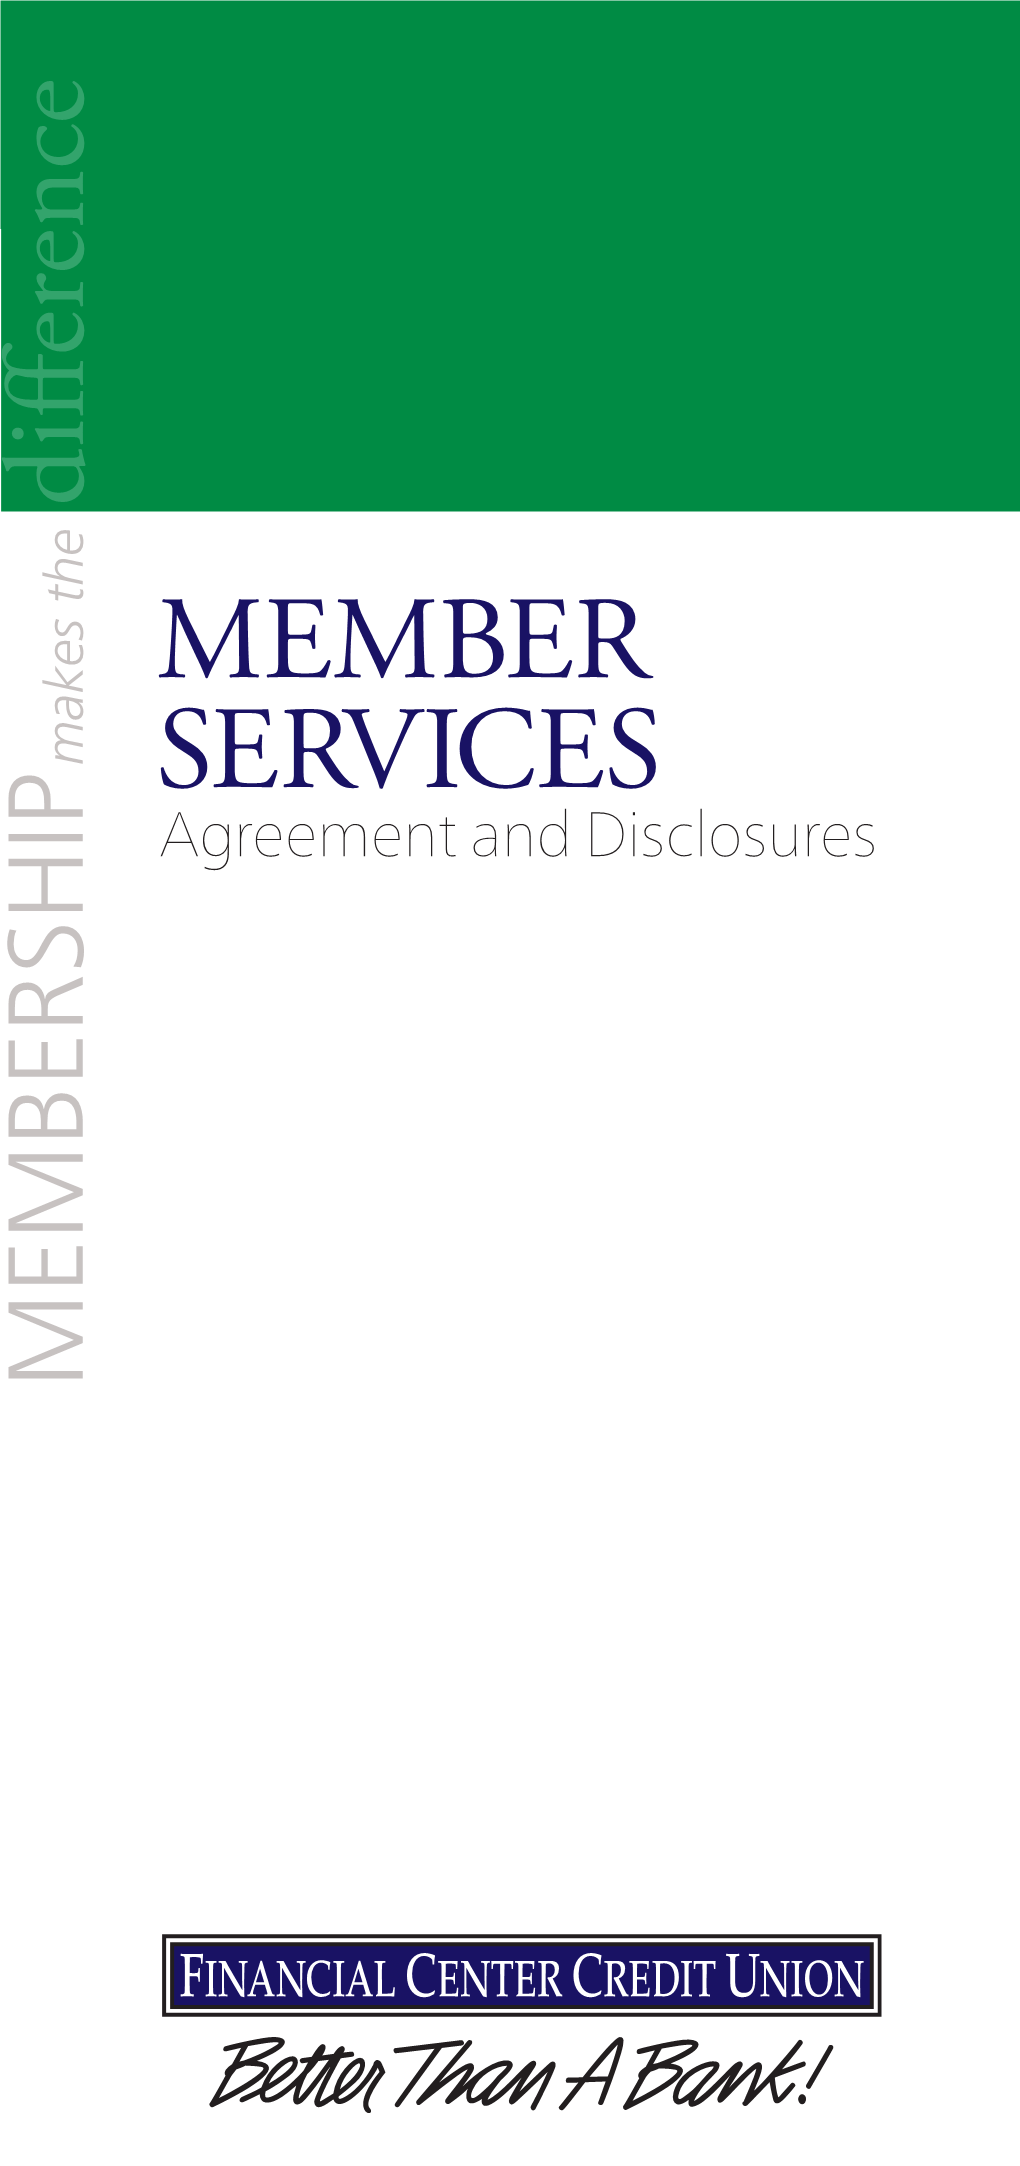 Financial Center Credit Union’S Member Services Agreements and Disclosures